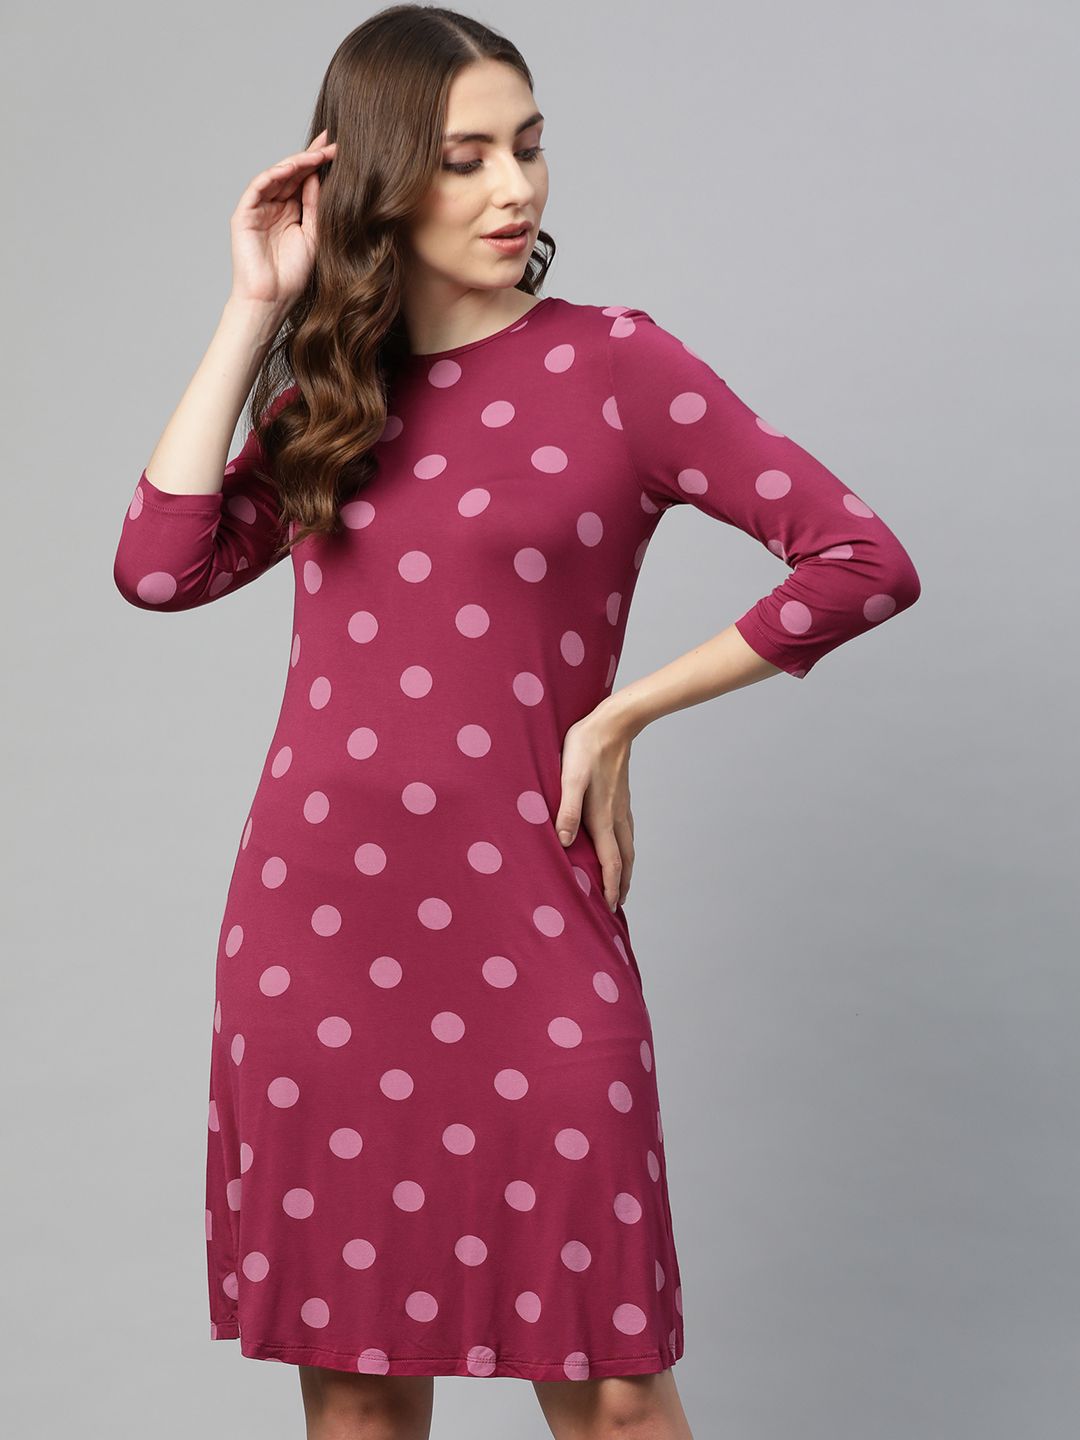 Marks & Spencer Purple & Pink Polka Dot Print A-Line Dress Price in India